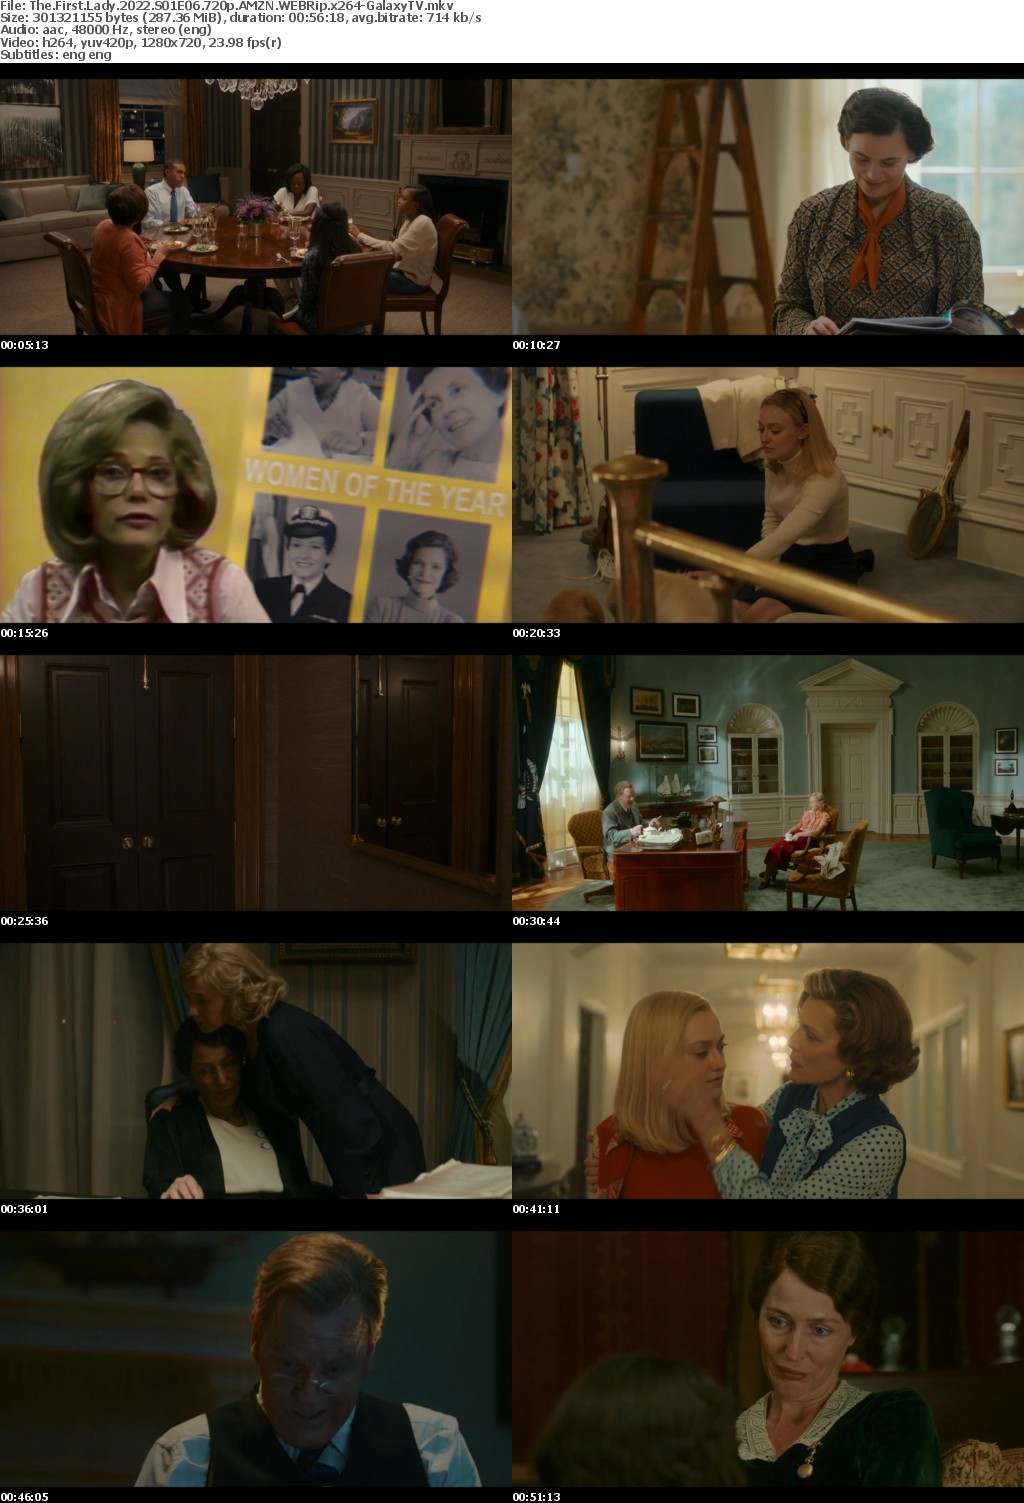 The First Lady 2022 S01 COMPLETE 720p AMZN WEBRip x264-GalaxyTV